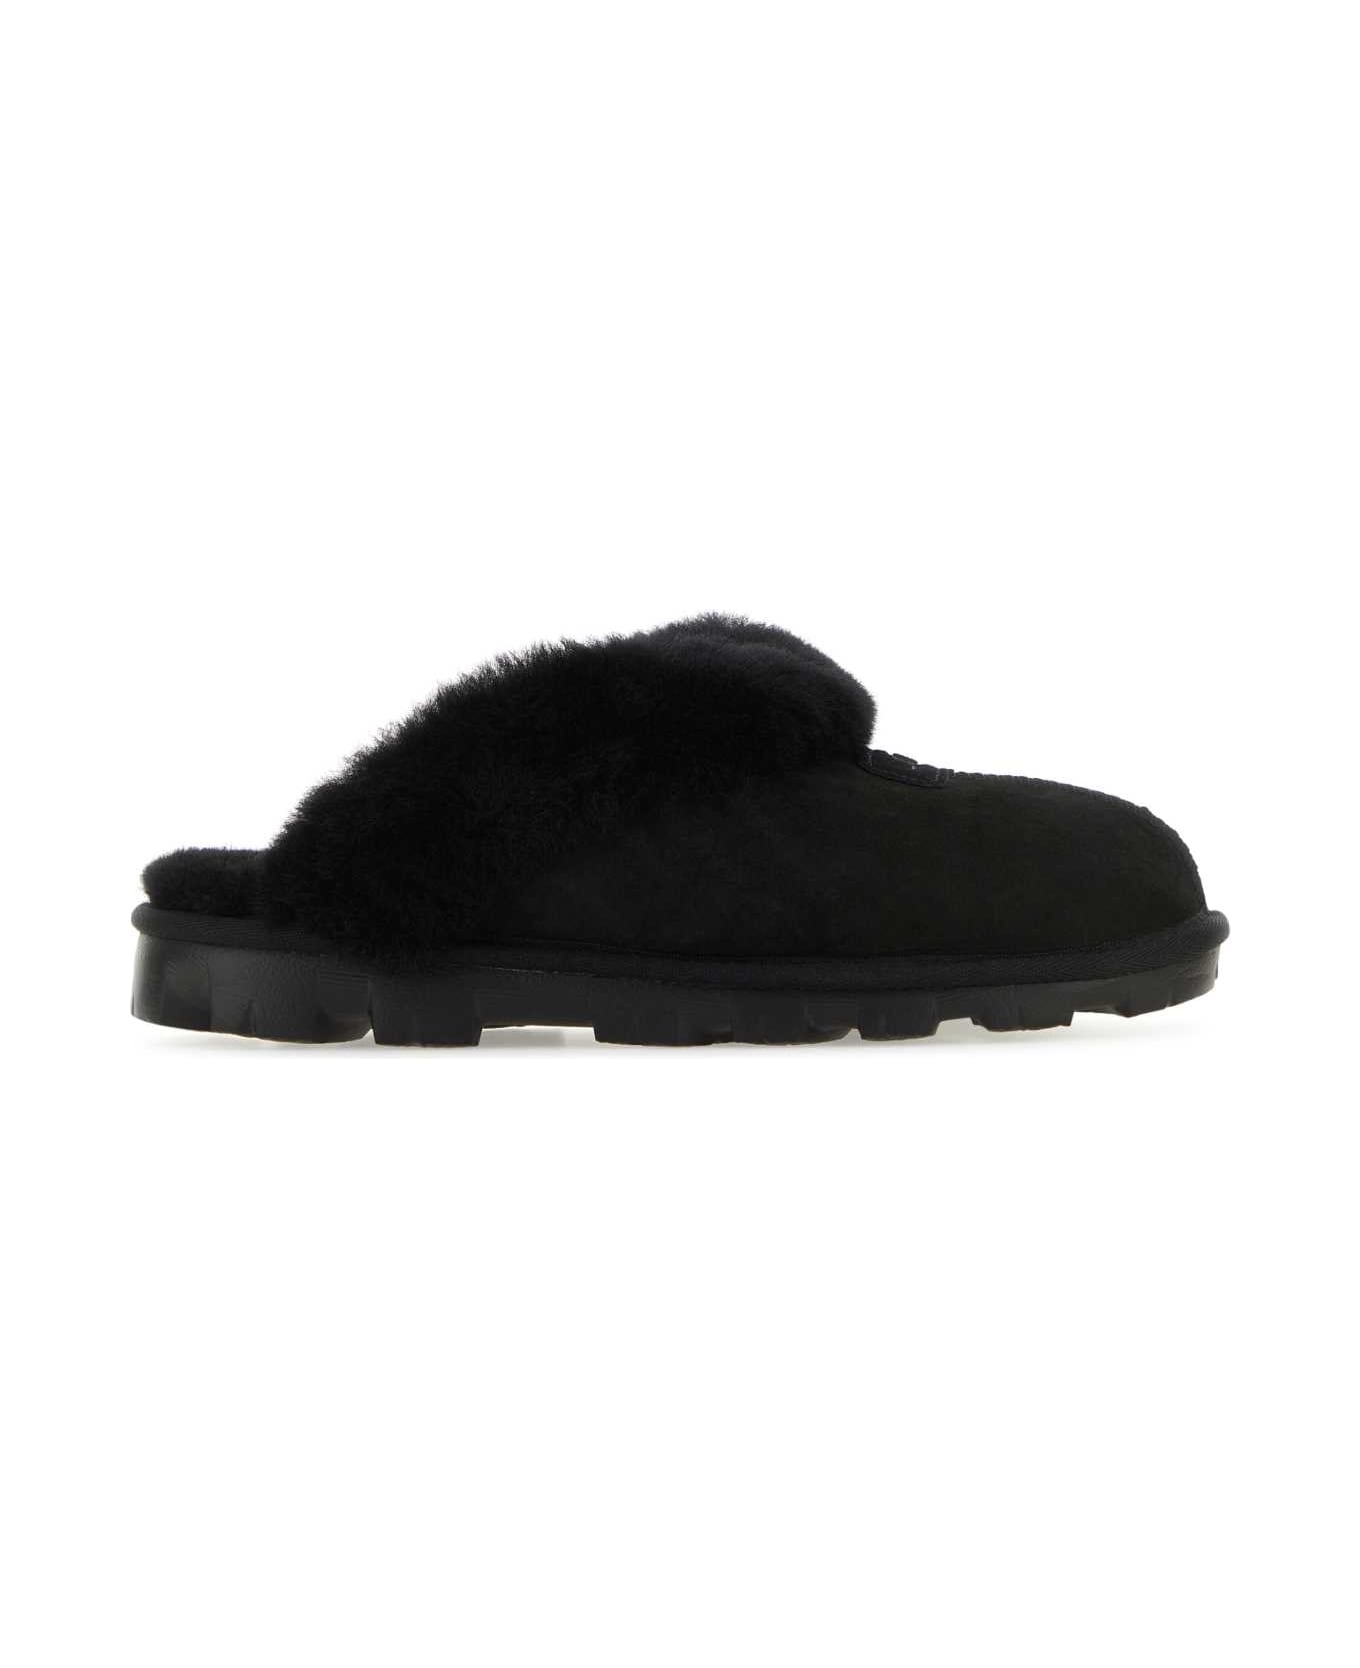 UGG Black Suede Coquette Slippers - BLACK